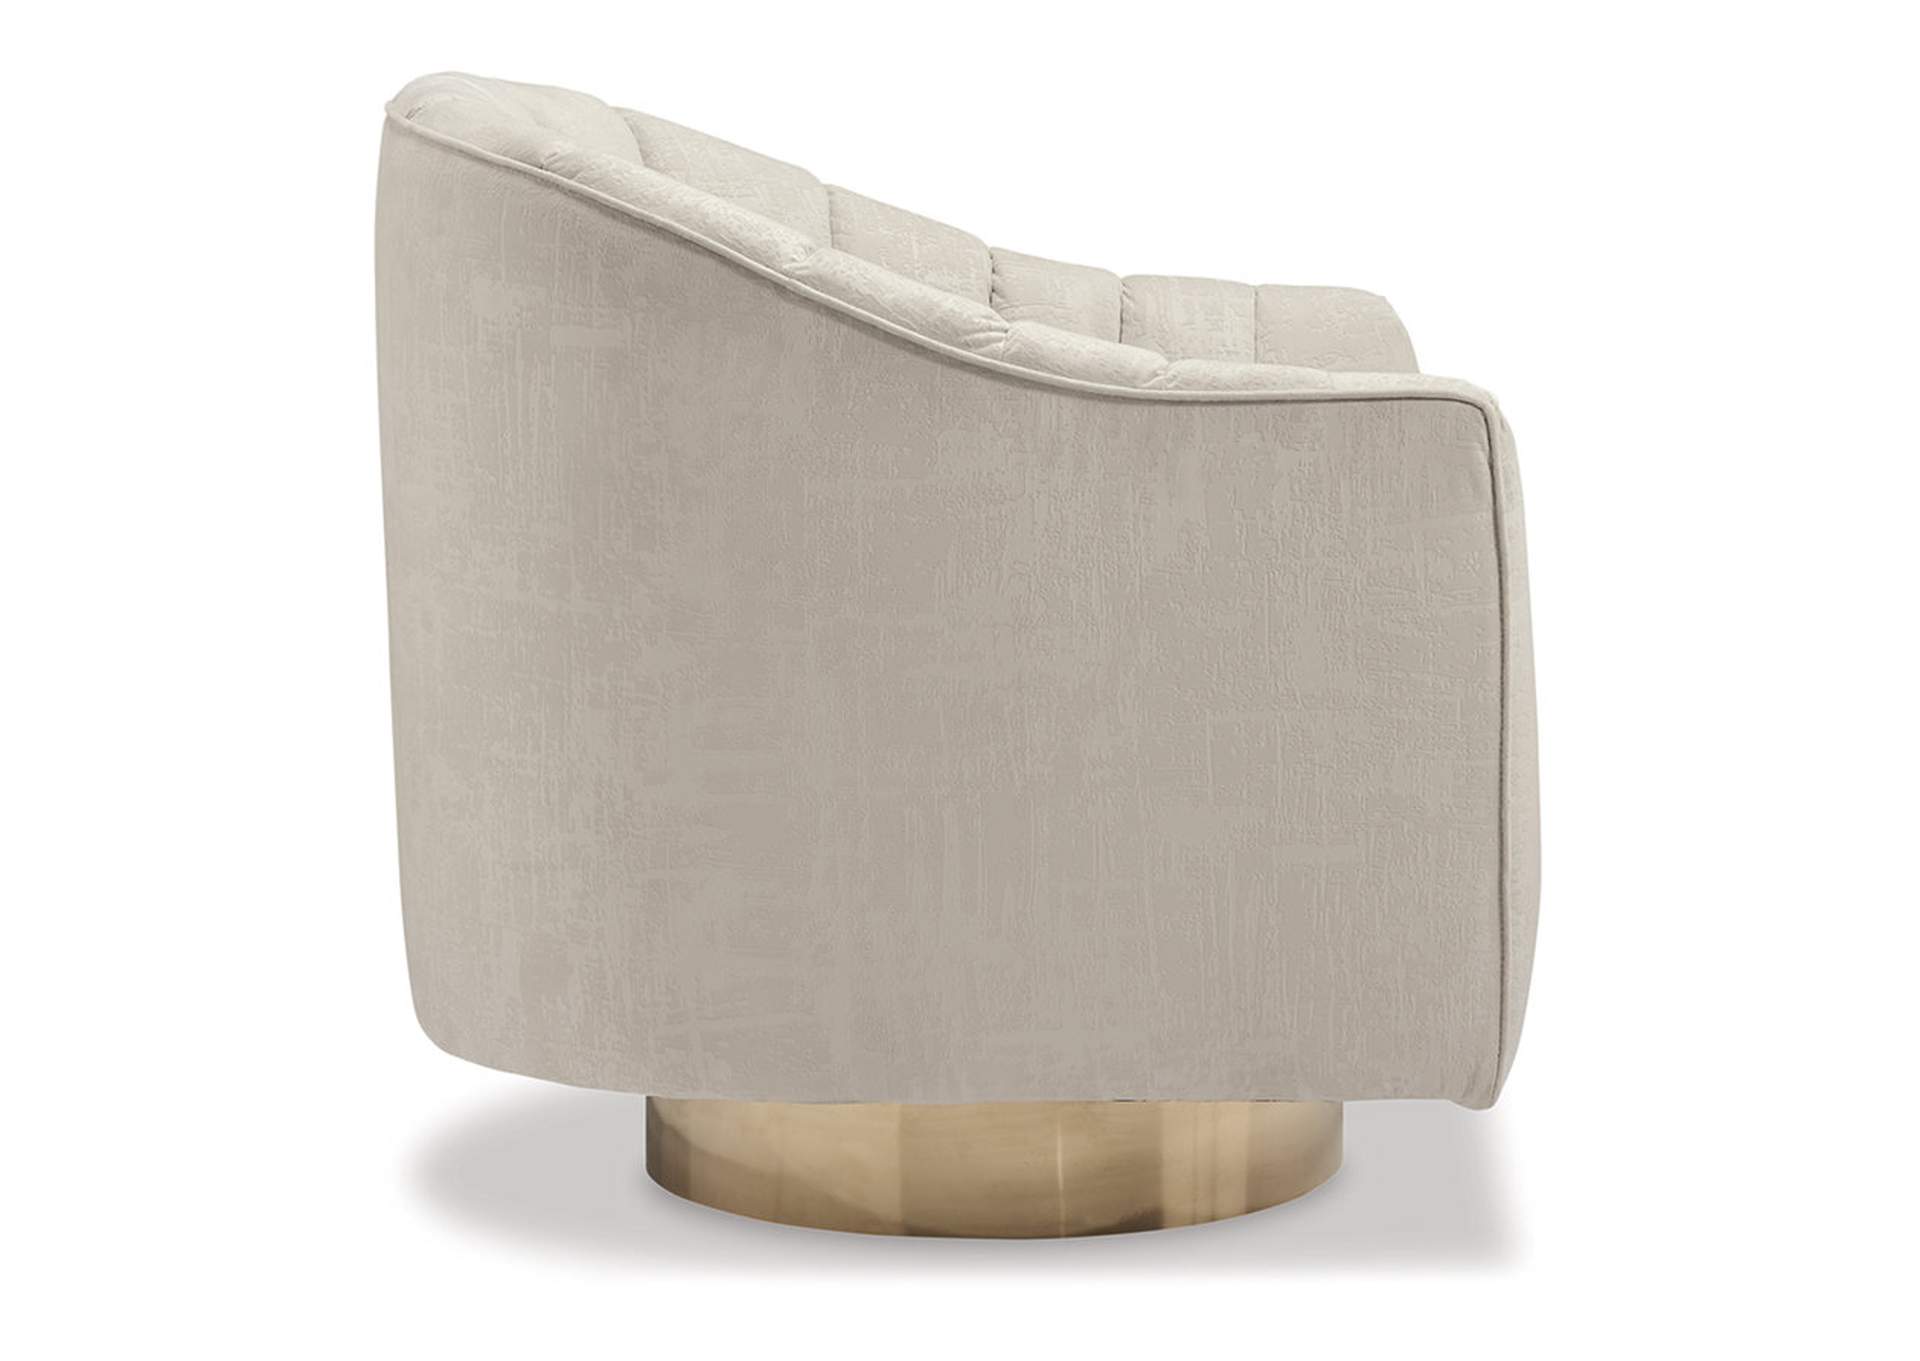 Penzlin Accent Chair,Signature Design By Ashley